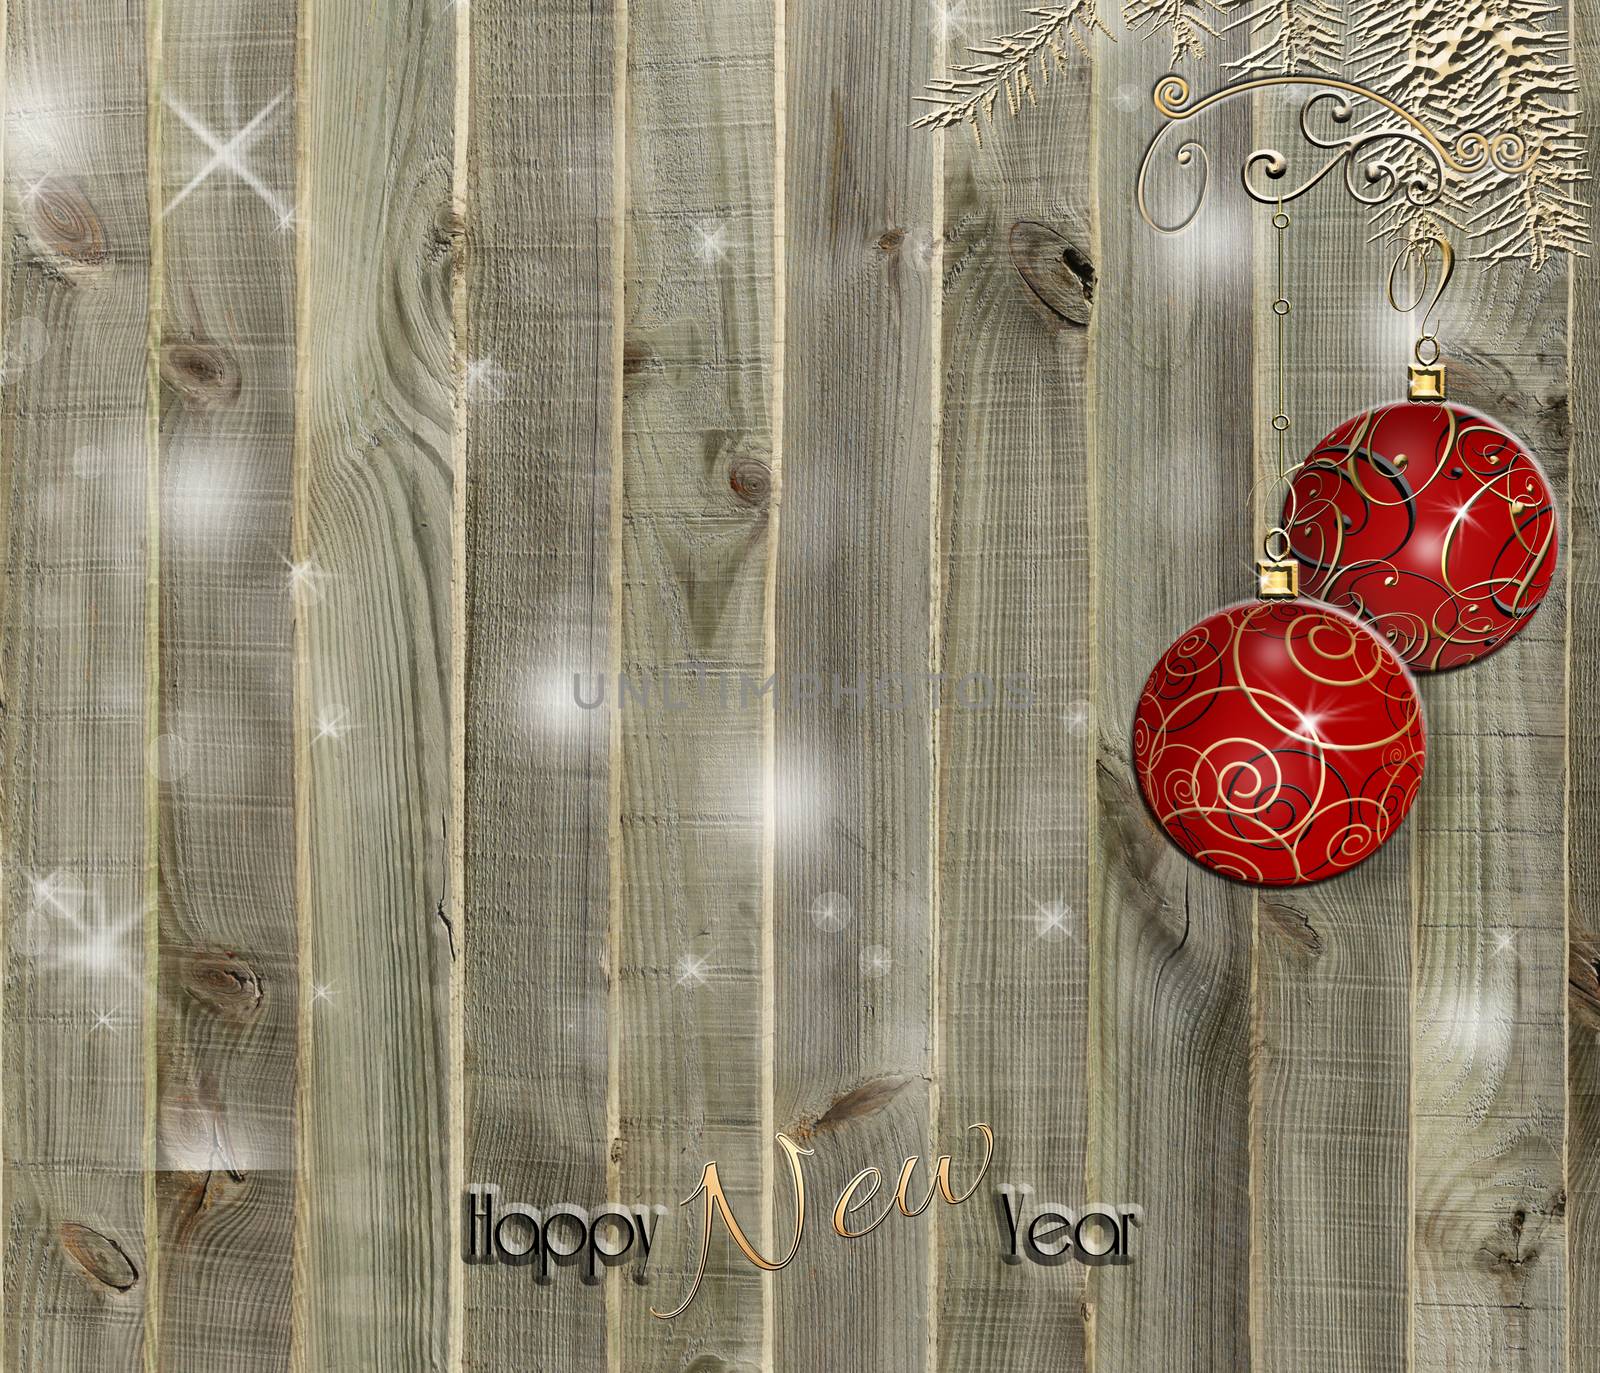 Christmas Decoration Over Wooden Background. Decorations over Wood. by NelliPolk